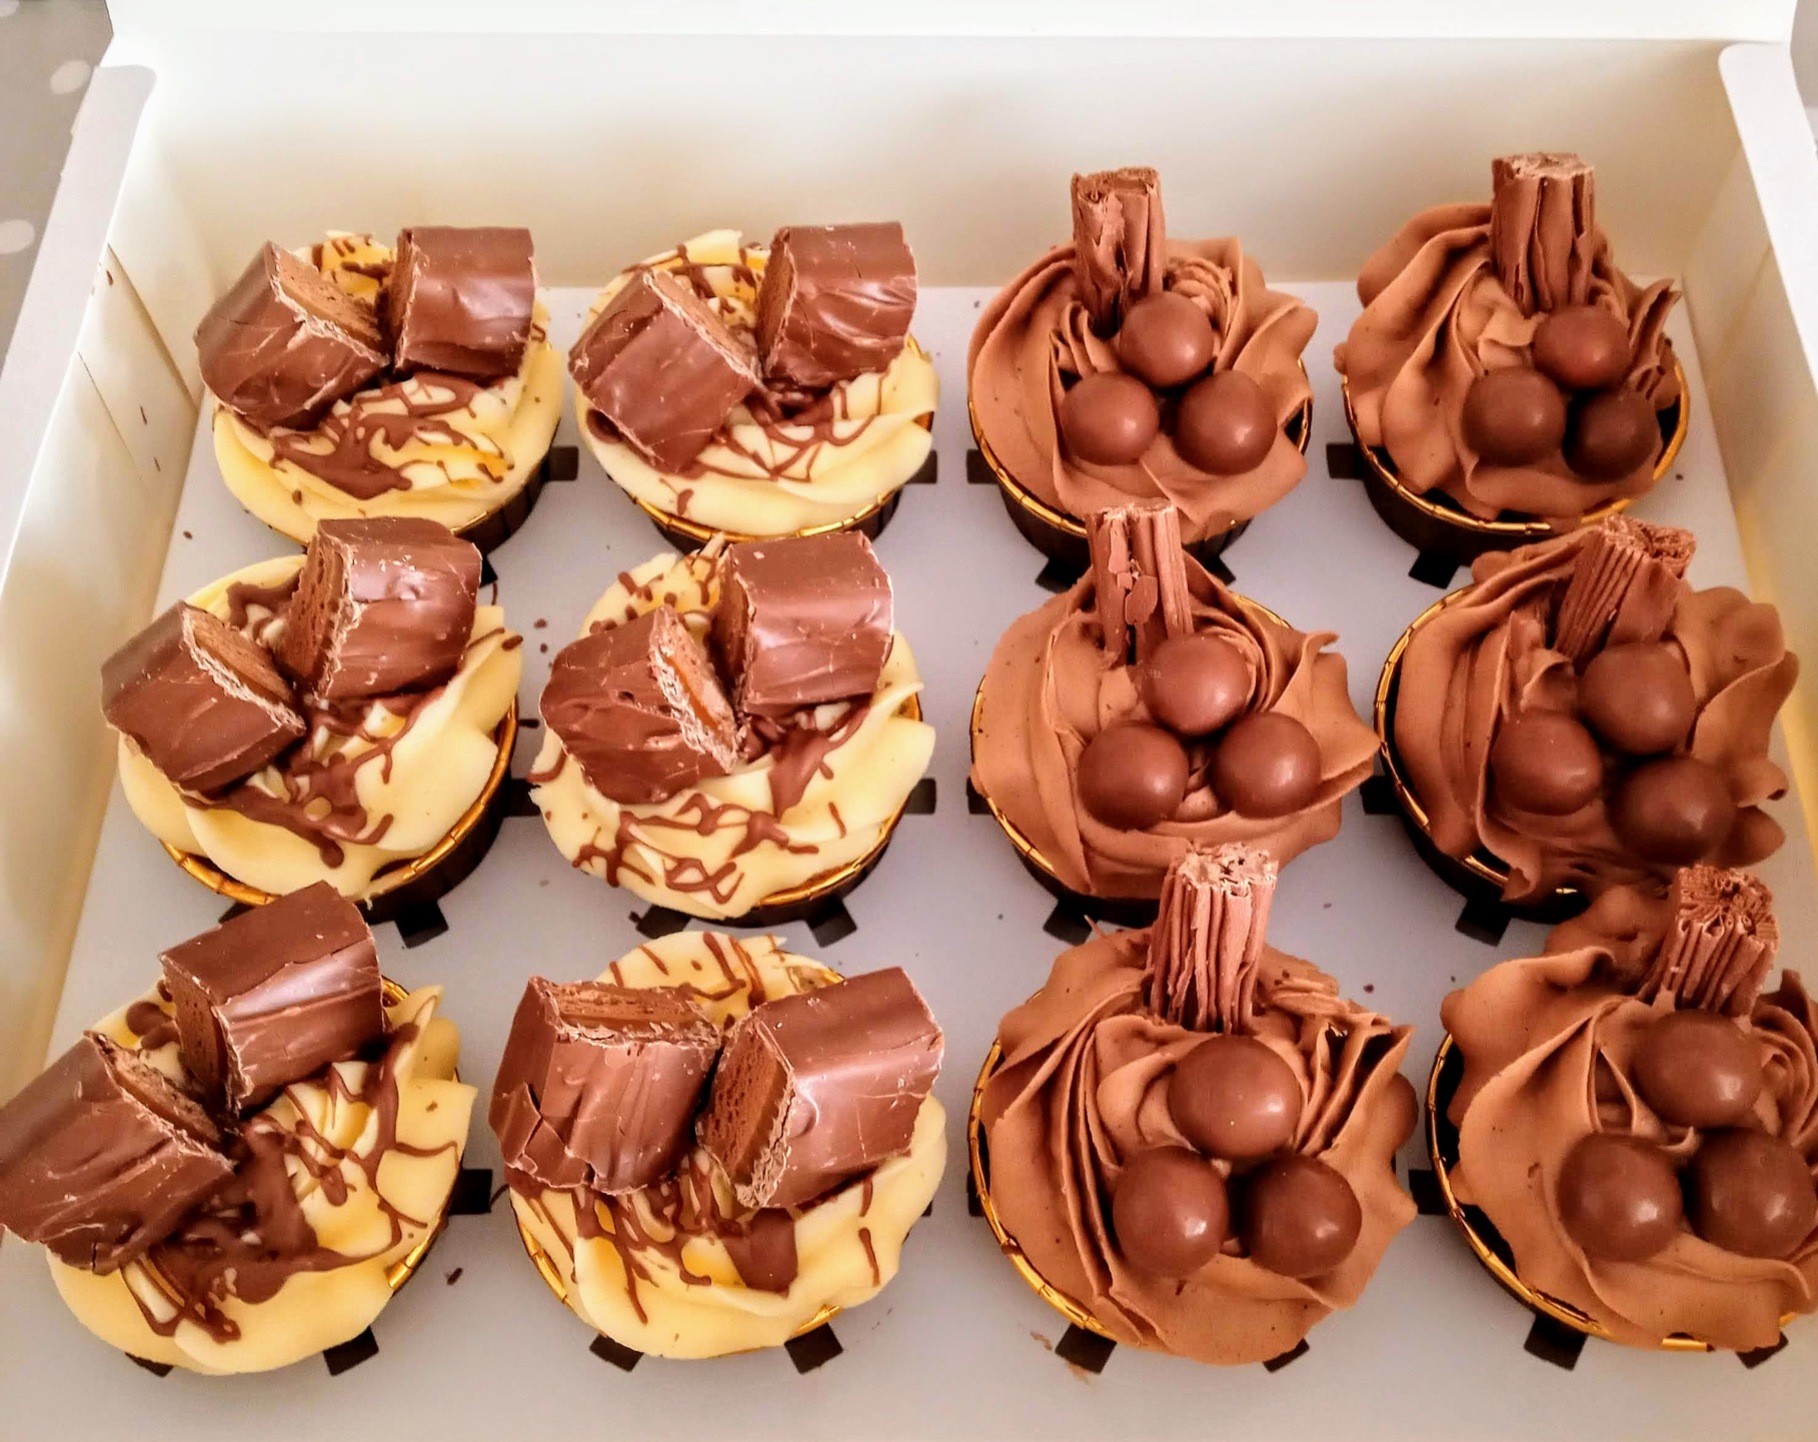 Mixed box of cupcakes topped with chocolate goodies